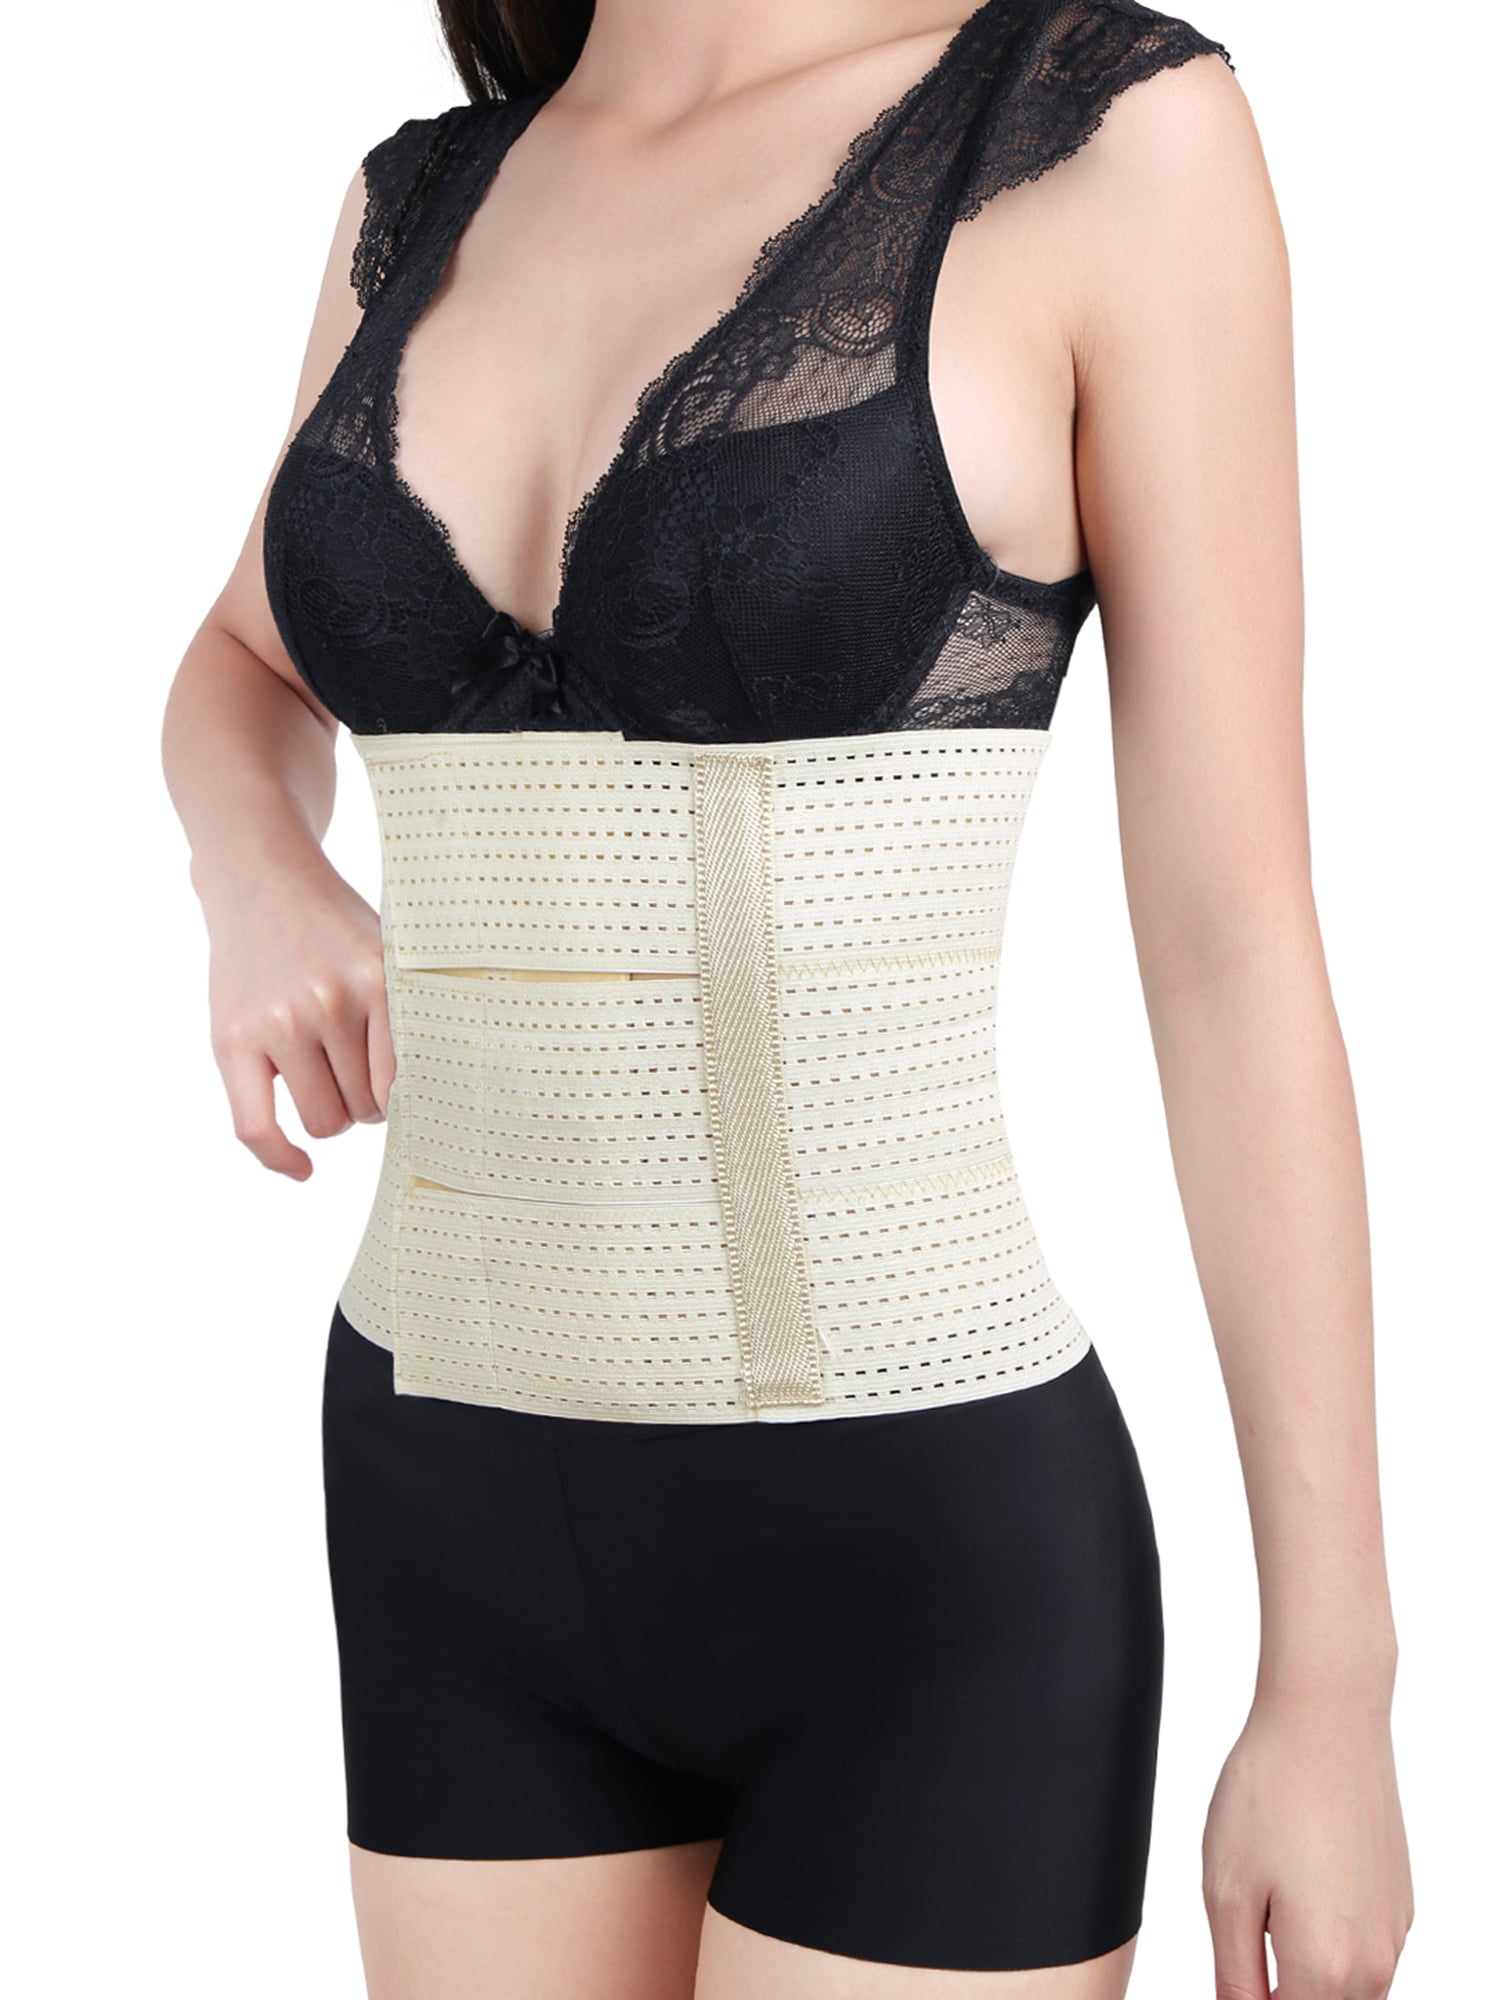 Lady Body Slim Shaper Belly Band Postpartum Recovery Belt Slimming Corset Girdle 